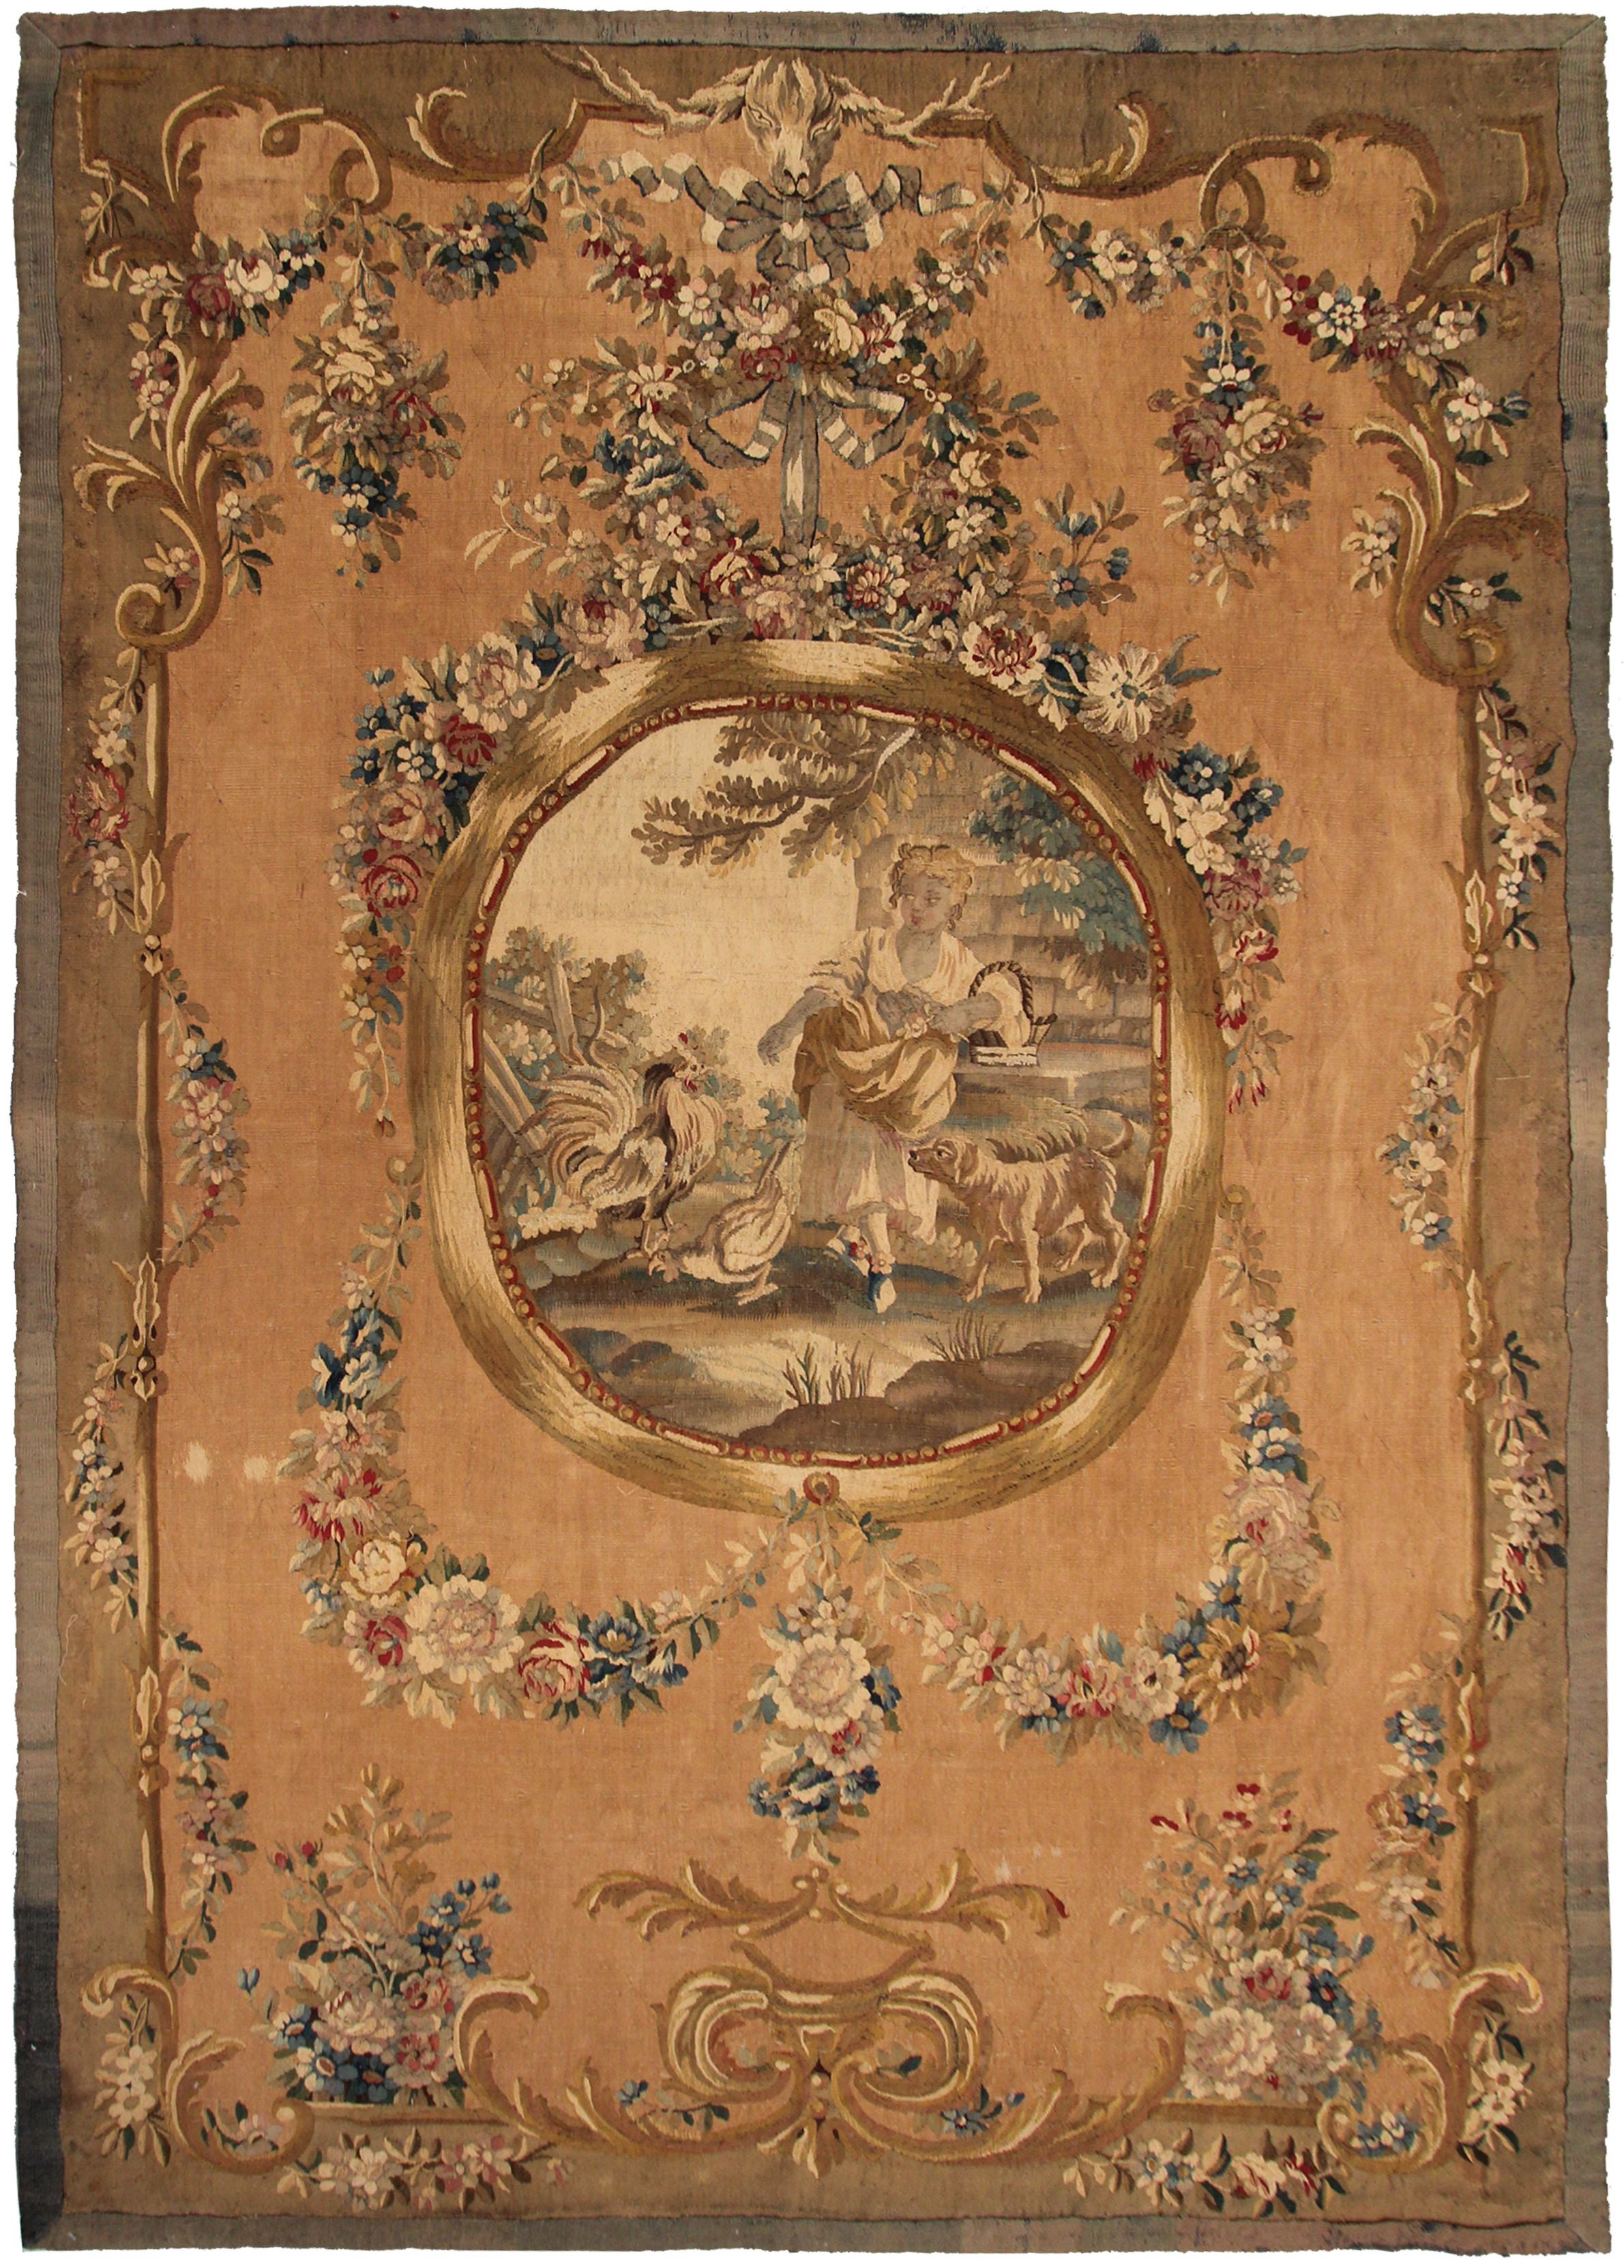 1870 Antique French Tapestry Wool & Silk Tapestry Beige Handmade Tapestry